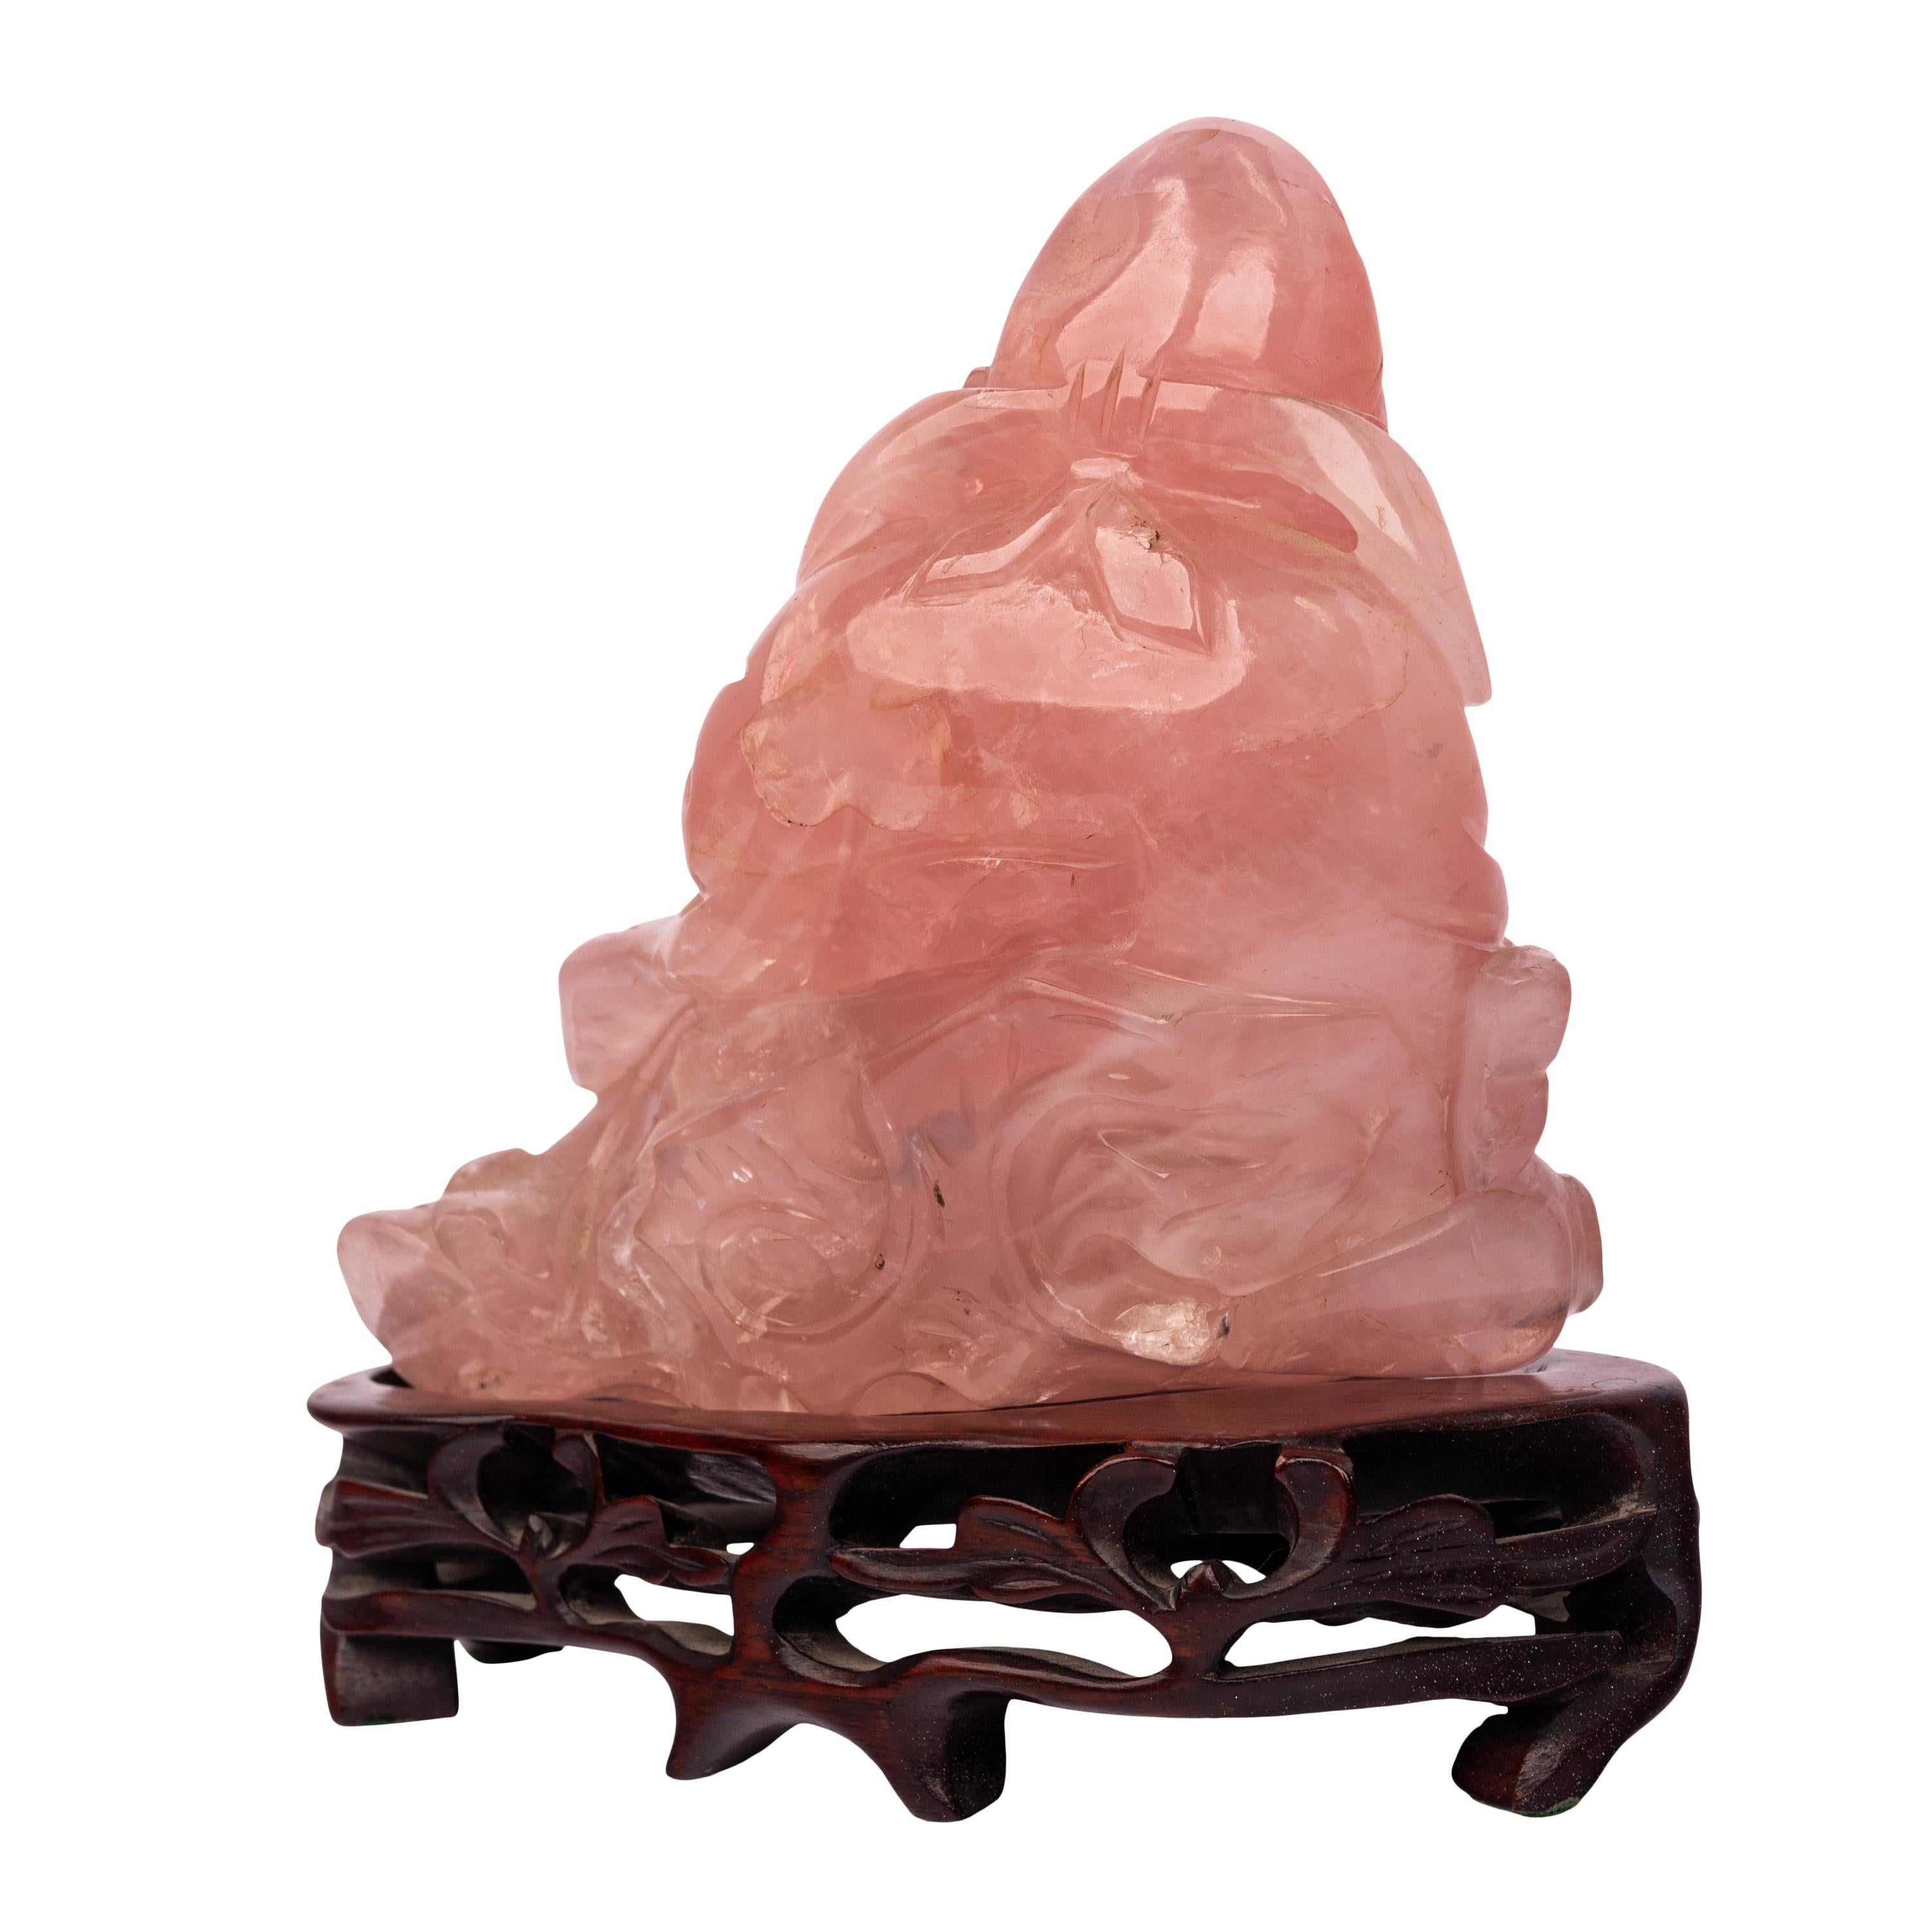 Antique Chinese Qing Dynasty Carved Rose Quartz Hotei Buddha Statue & Stand 1910 In Good Condition For Sale In Portland, OR